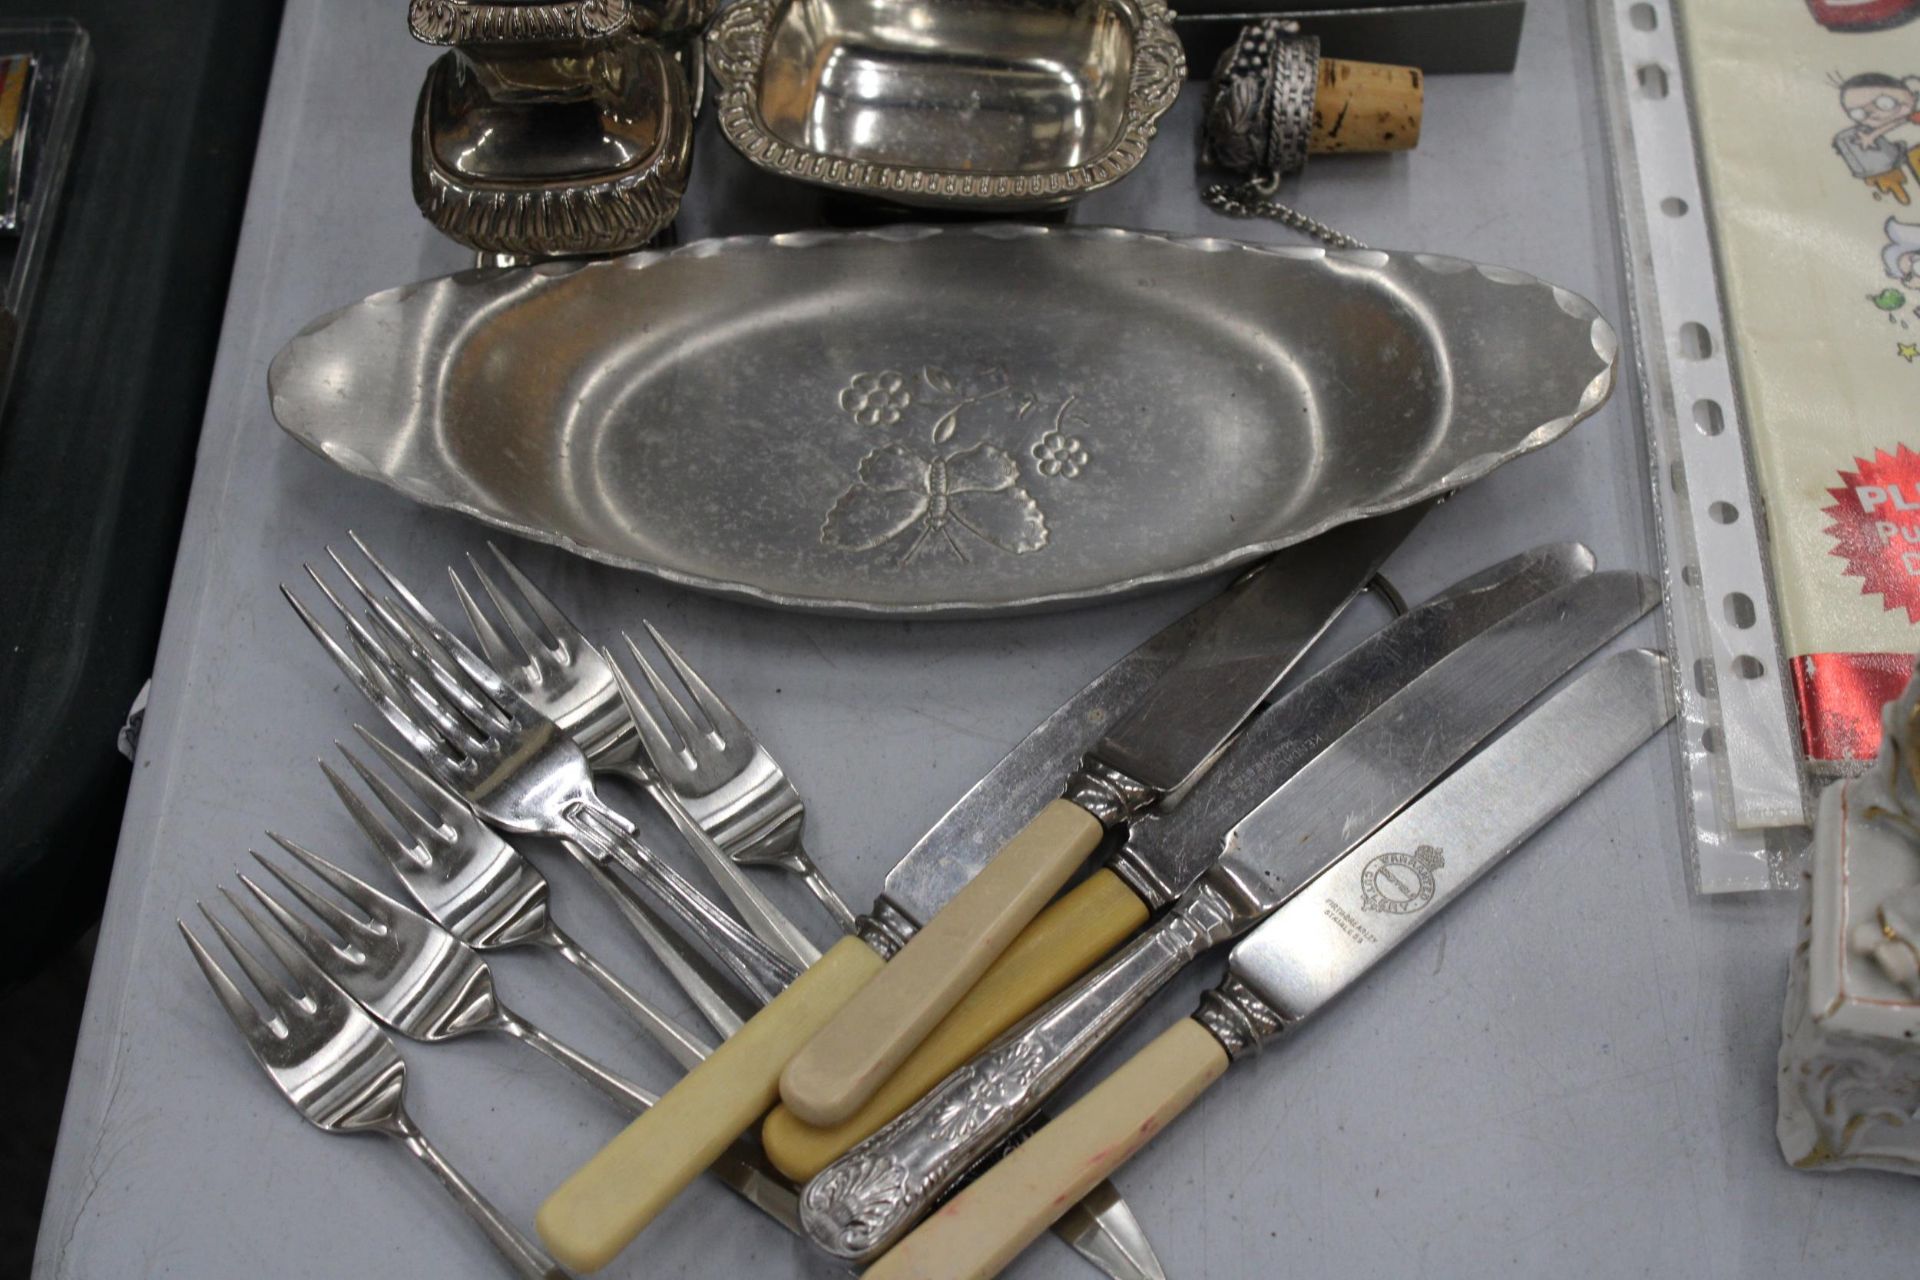 A QUANTITY OF SILVER PLATED AND METAL ITEMS TO INCLUDE GOBLETS, A CRUET SET, DISHES, FLATWARE, ETC - Image 4 of 5